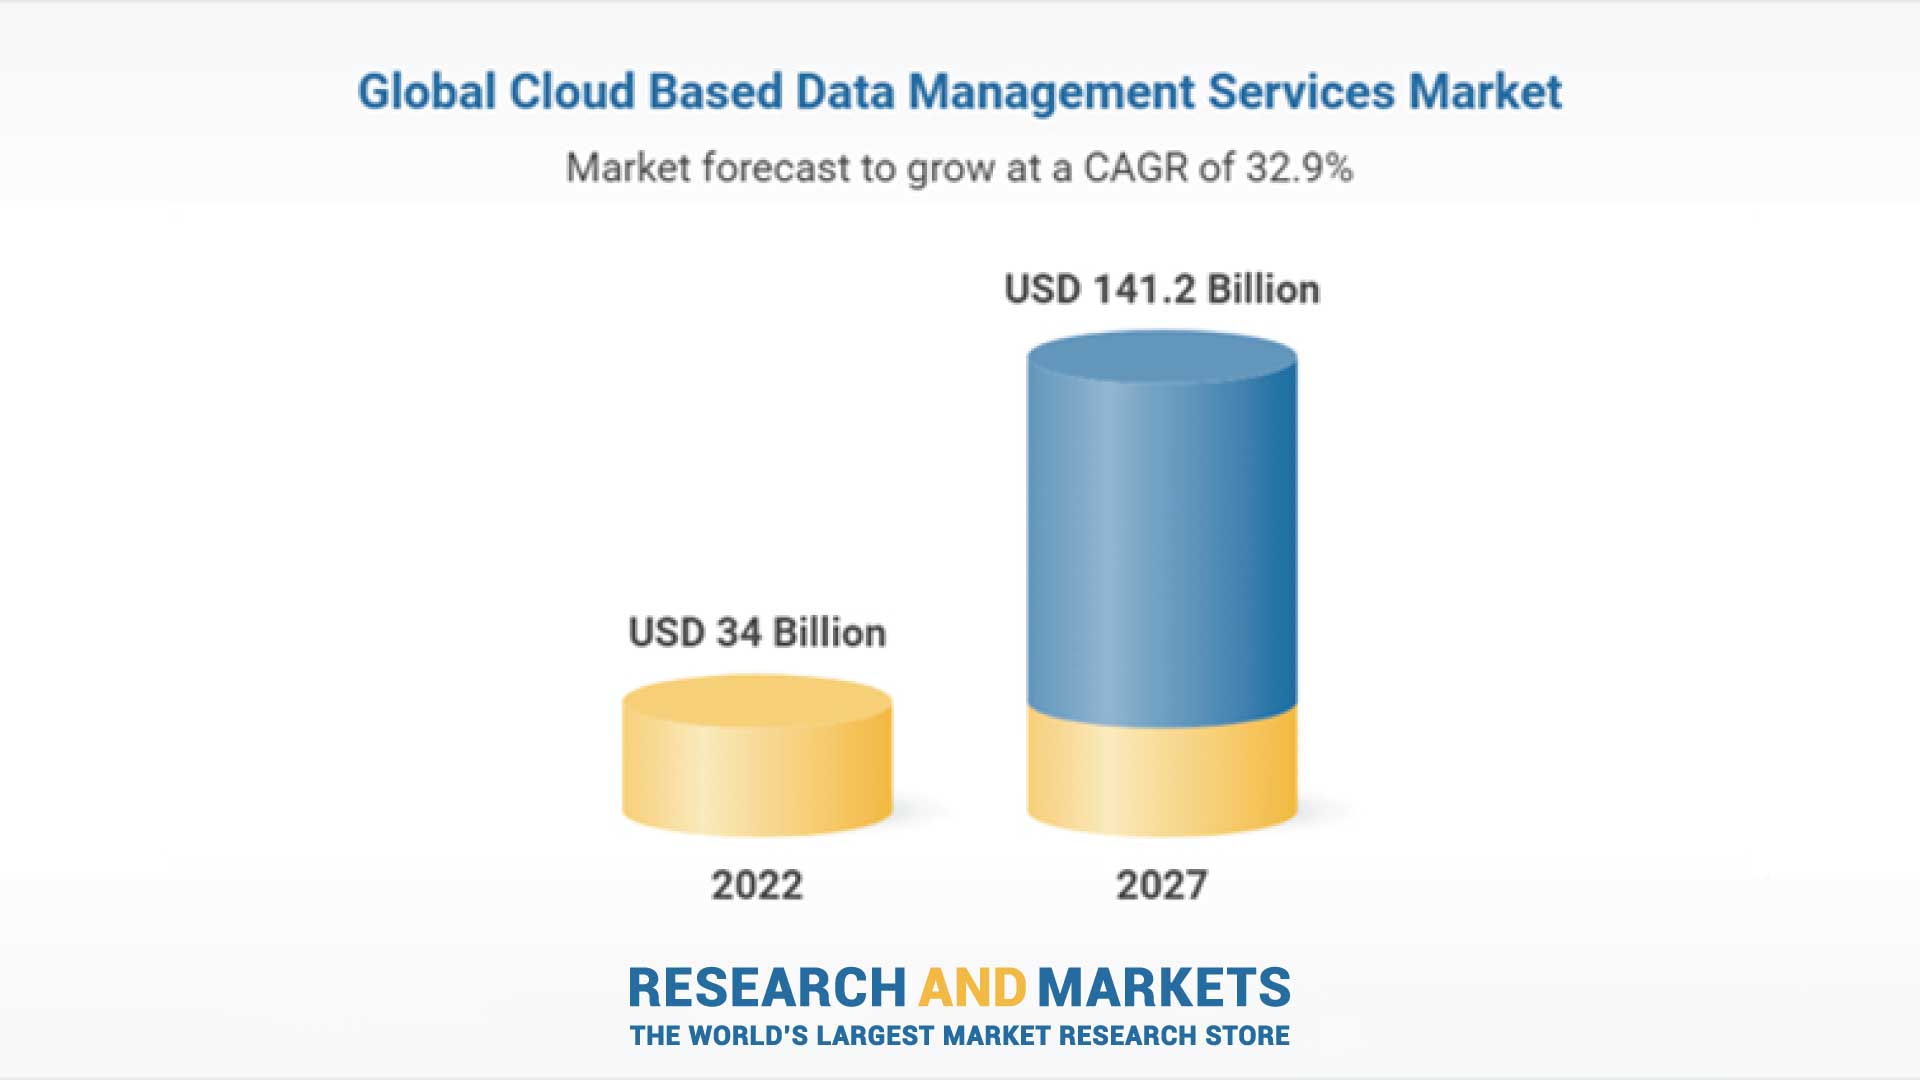 The Worldwide Cloud Based Data Management Services Industry is Expected to Reach $141.2 Billion by 2027